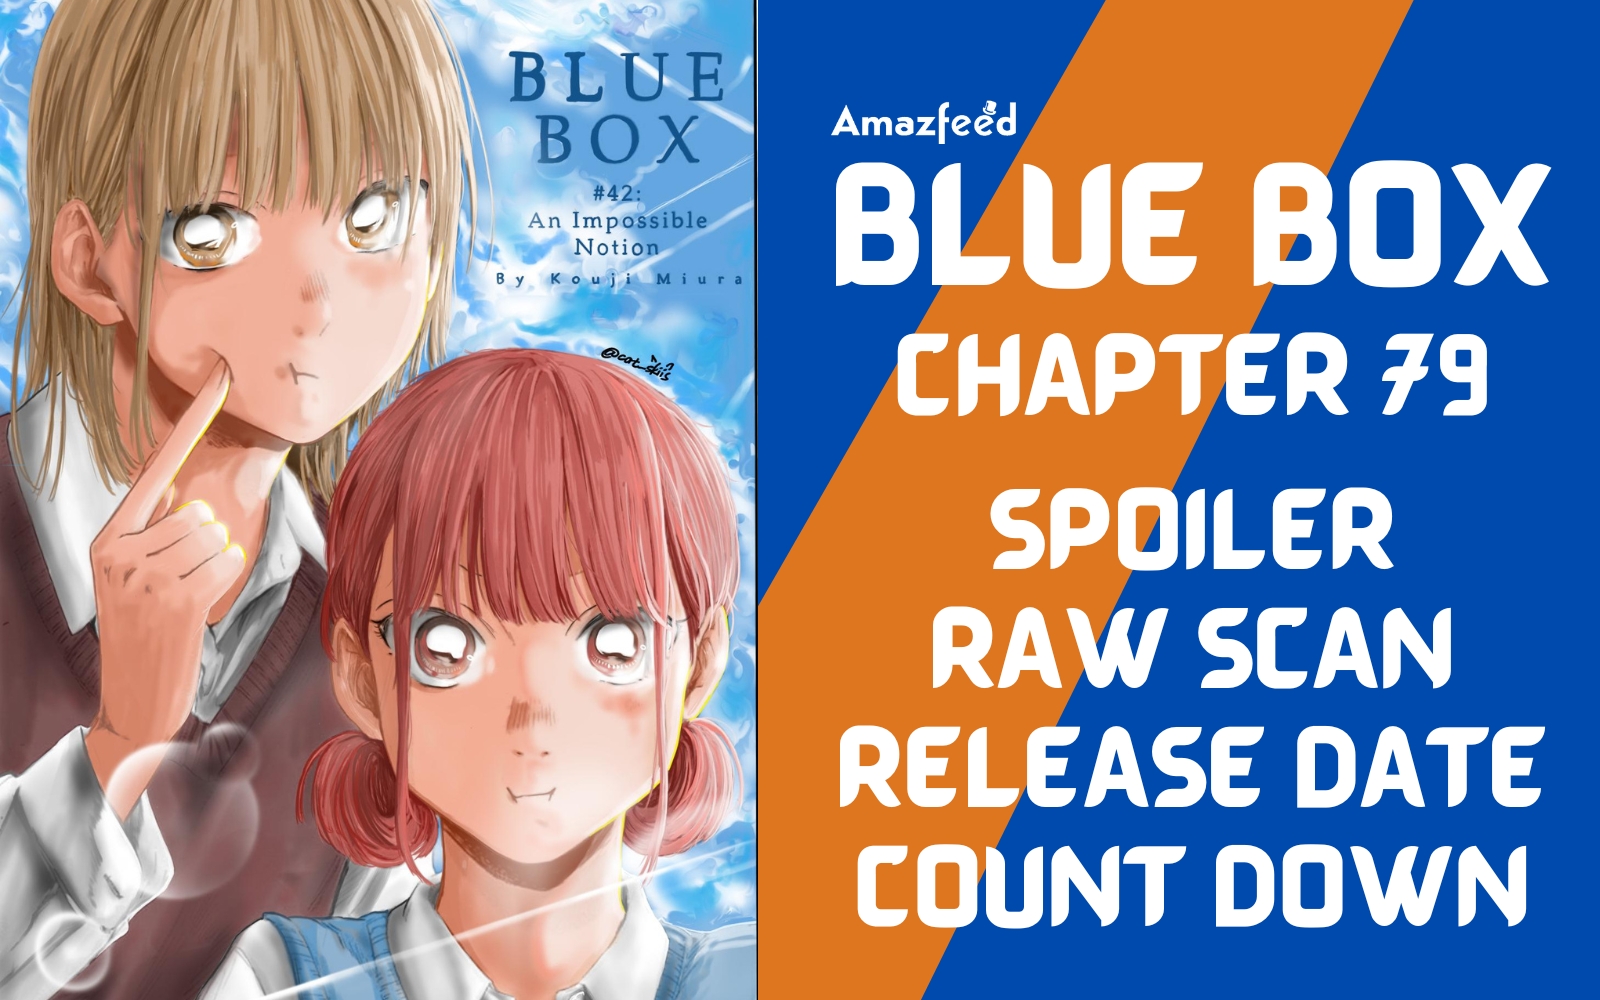 Blue Box Chapter 80 Spoiler, Raw Scan, Countdown, Release Date